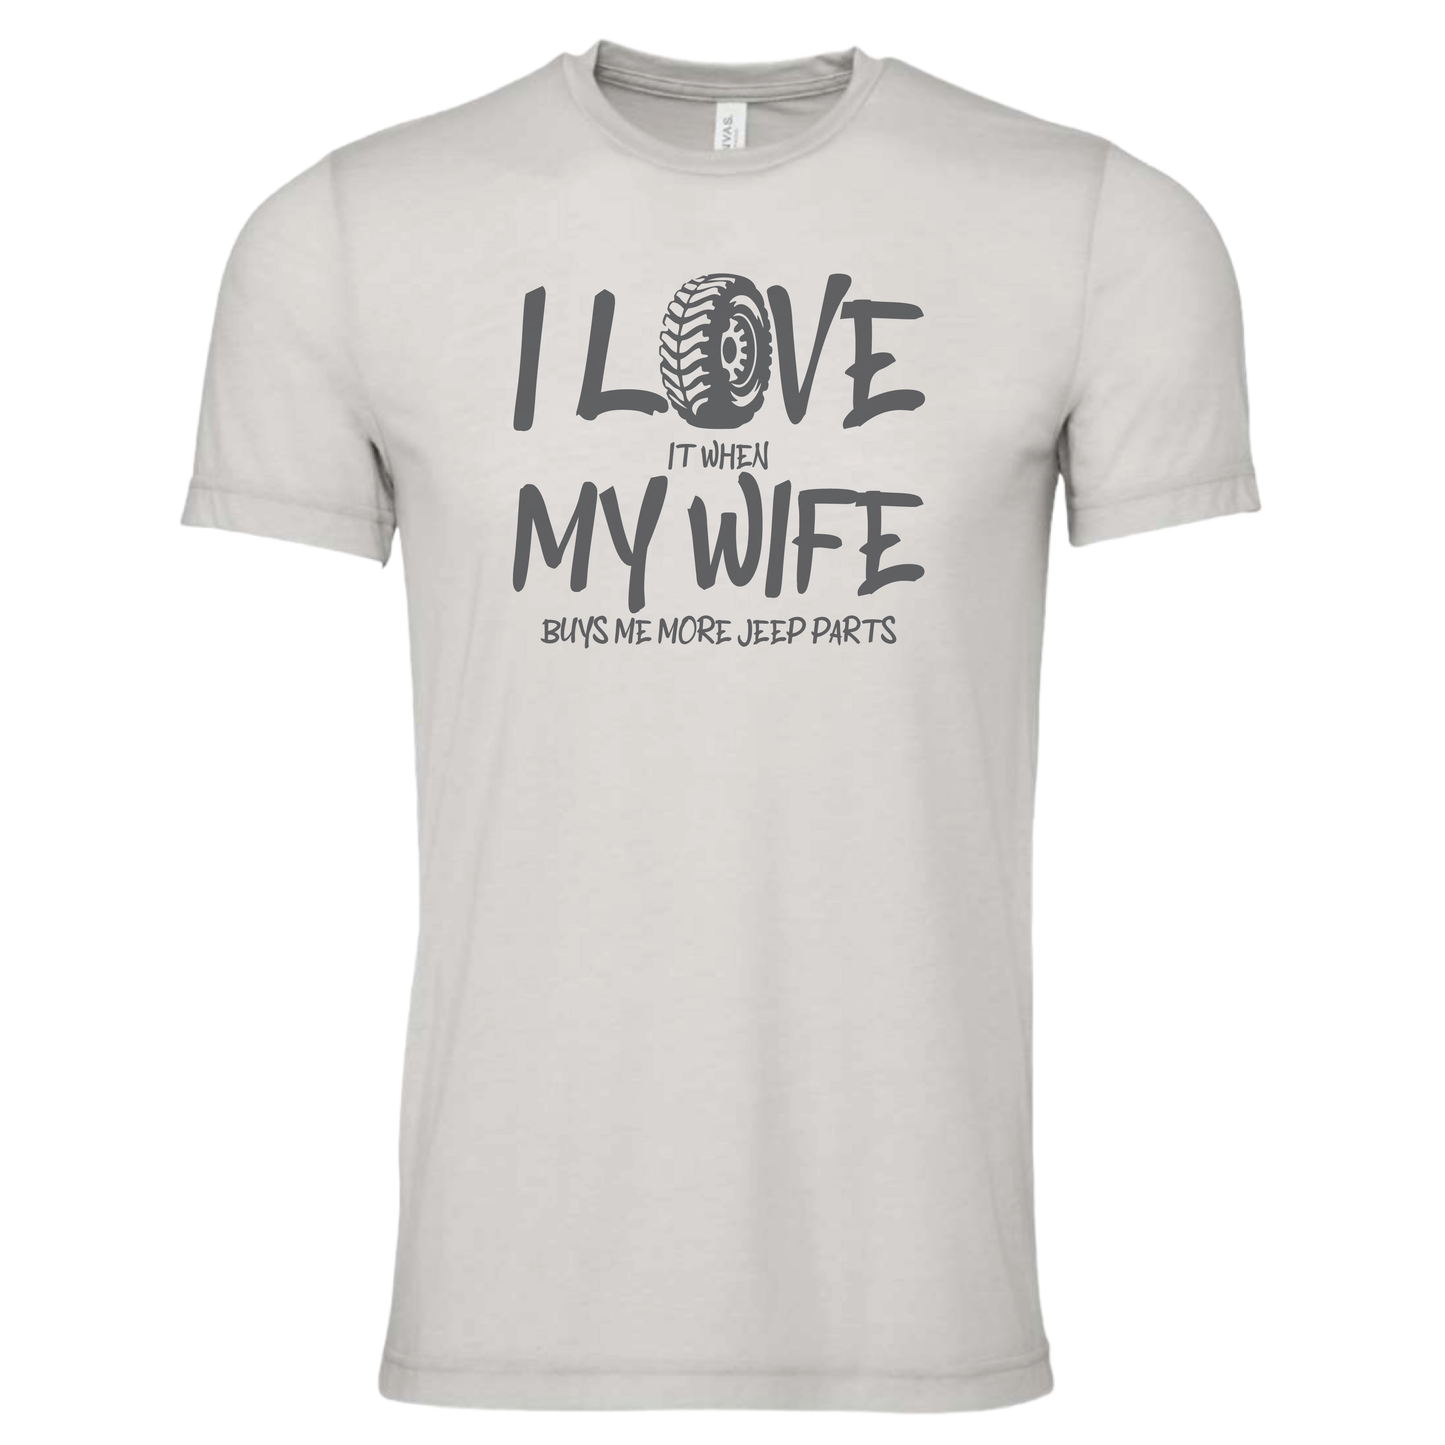 I Love My Wife - Shirt, Tank Top, Long Sleeve or Hoodie - Available in Multiple Colors